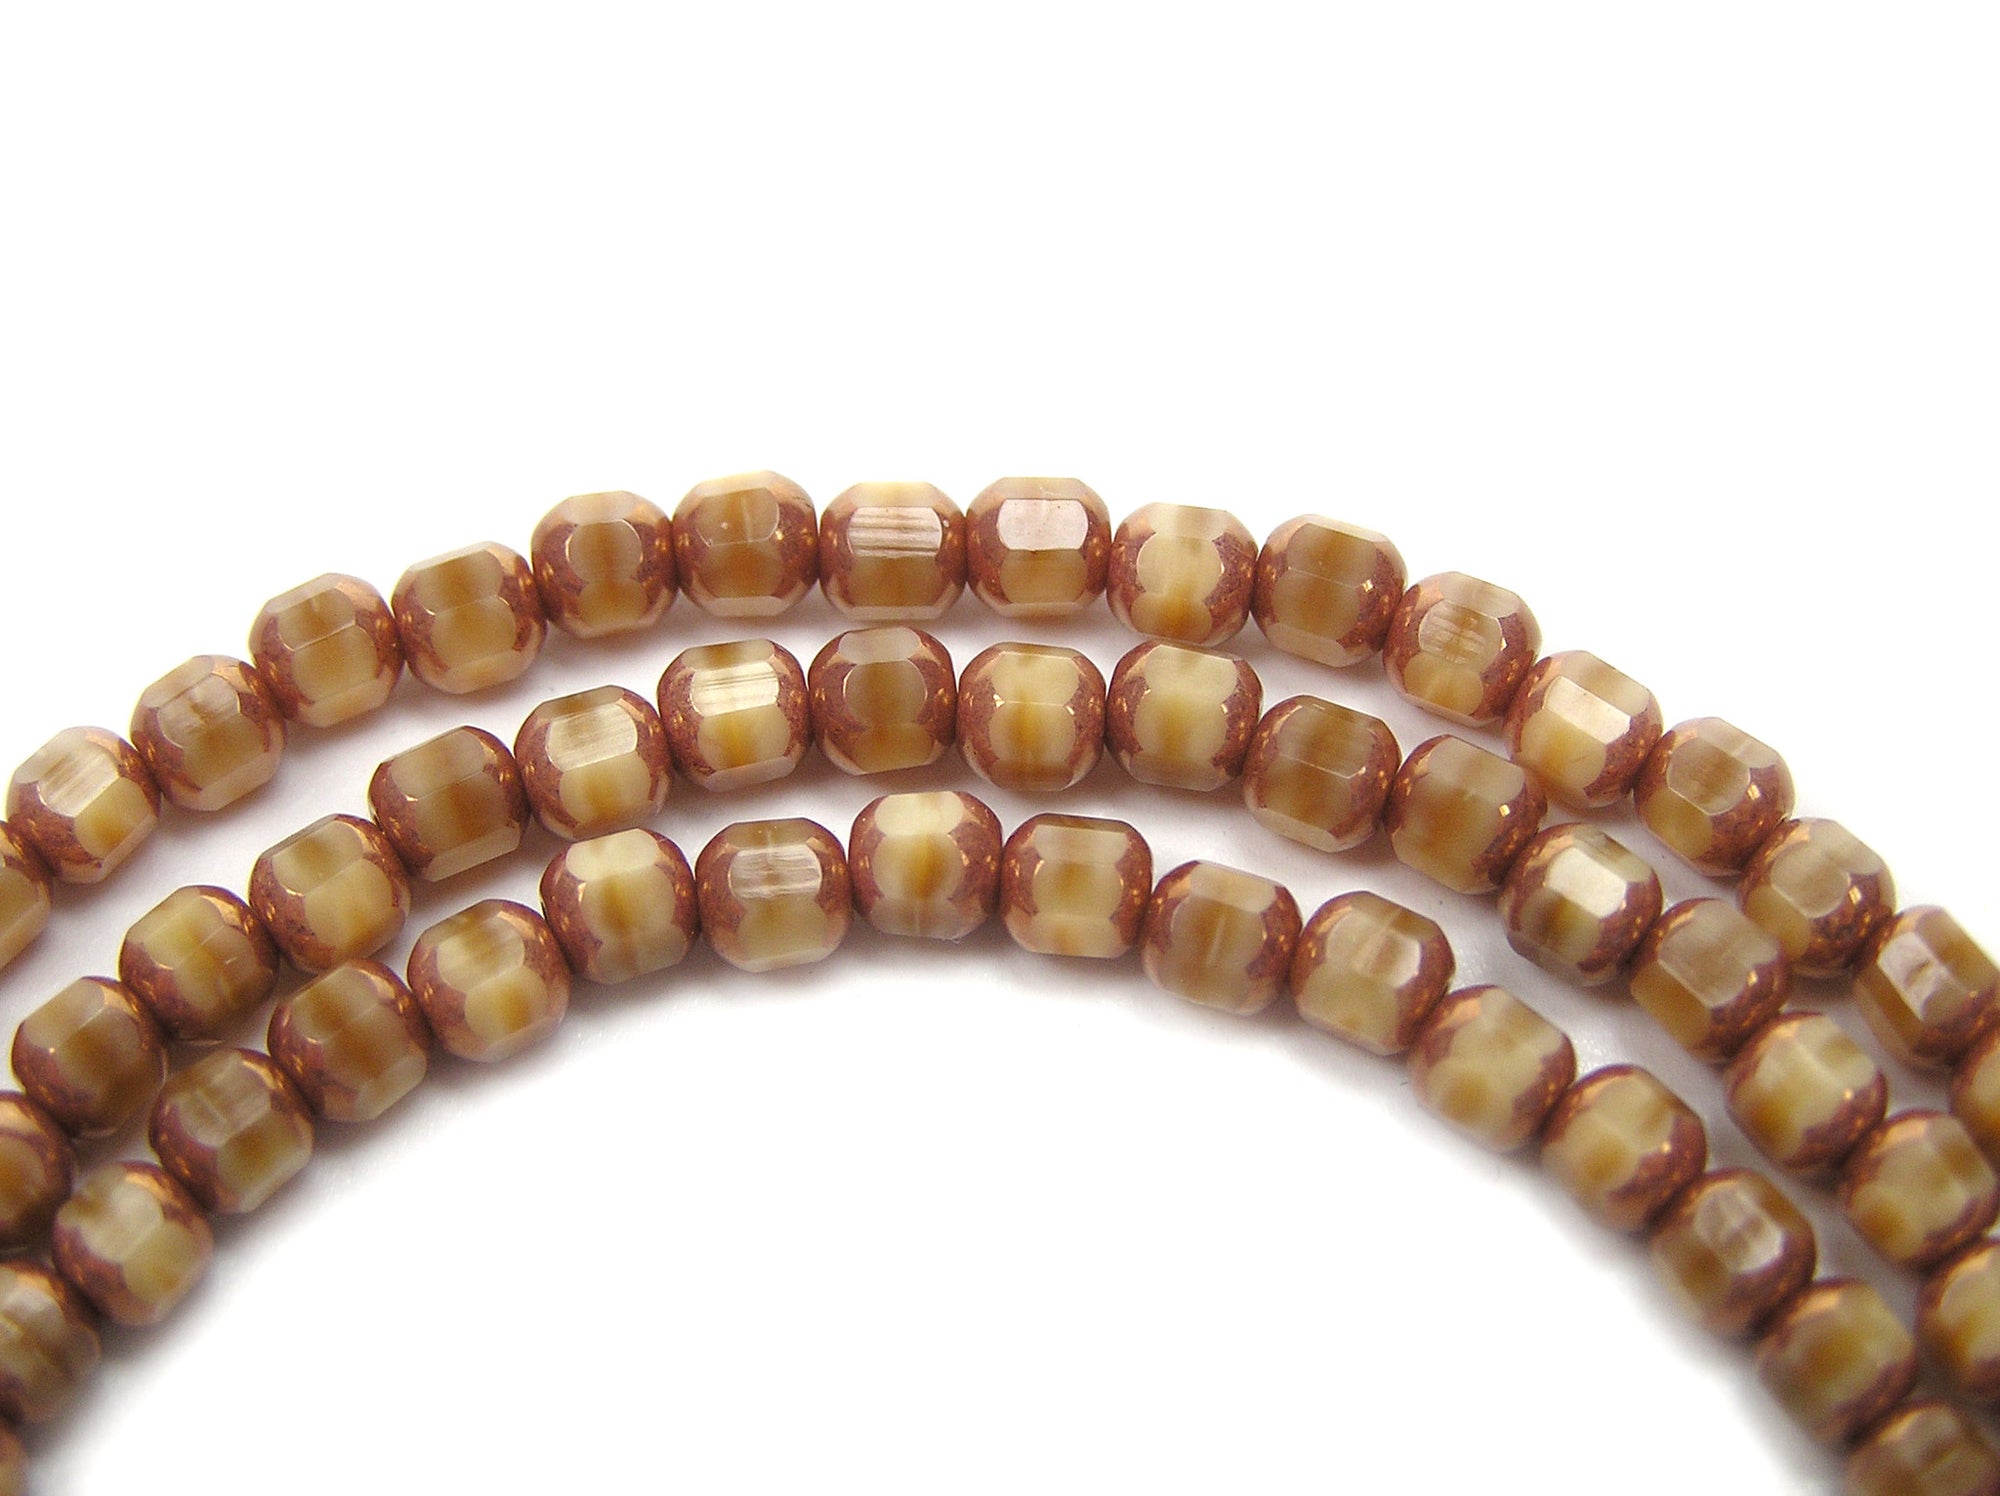 Brown Marmor, Czech Fire Polished Round Faceted Glass Beads, 4mm 100pc -  Crystals and Beads for Friends